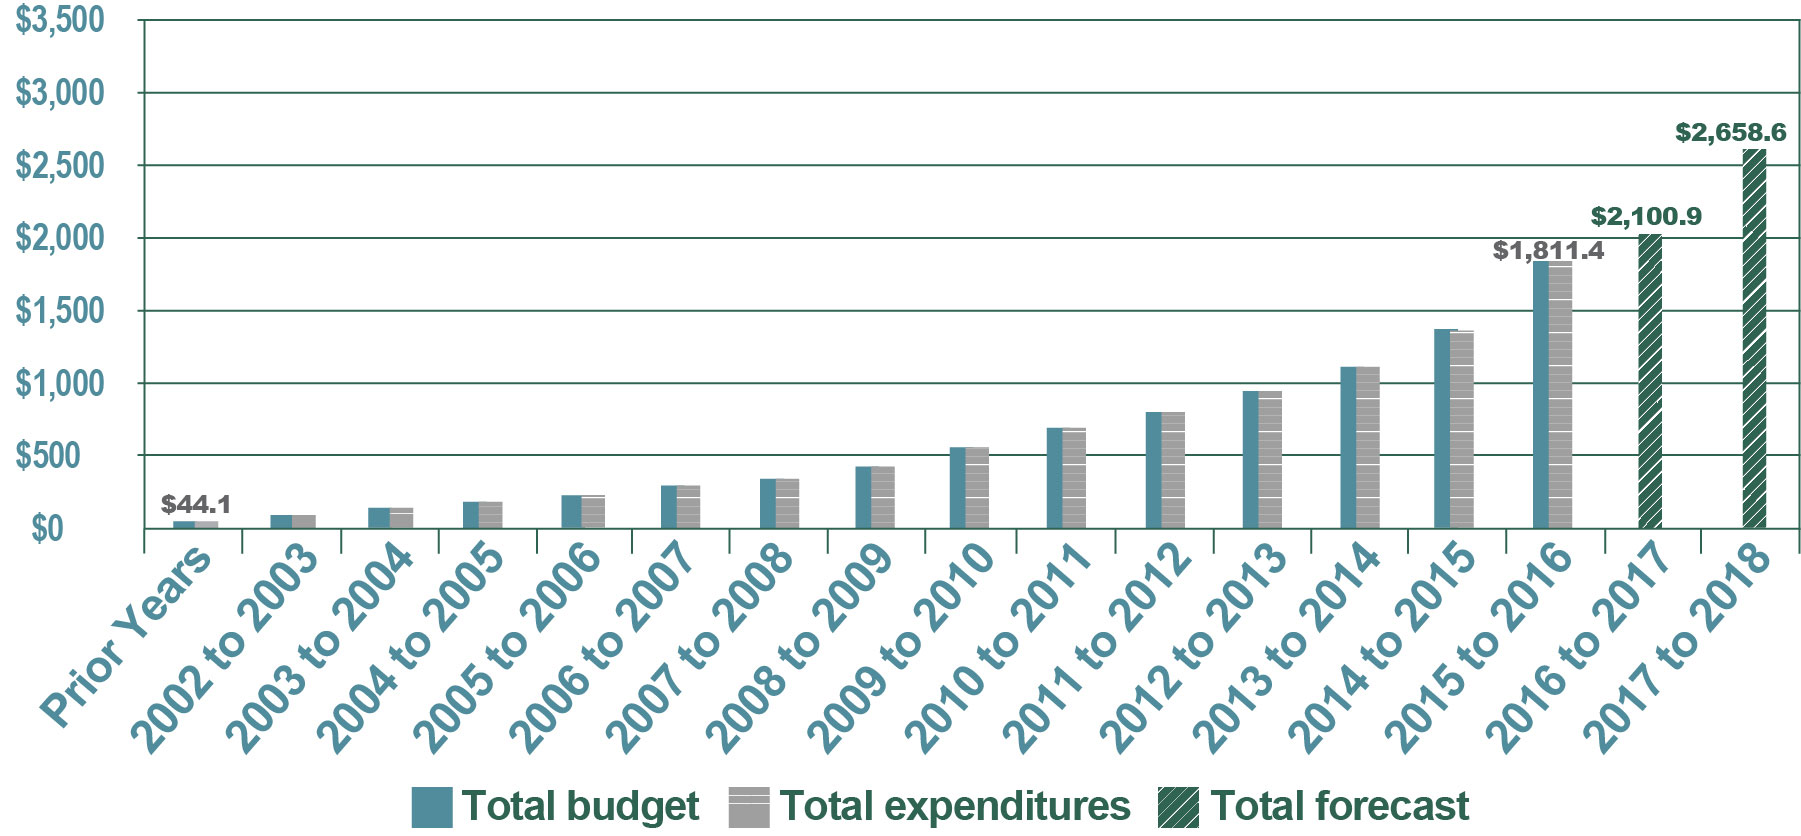 Figure 13—Long Term Vision and Plan Major capital program cumulative expenditures, forecasts and budgets—Fiscal year 2015 to 2016 (in millions of dollars) - See description below.